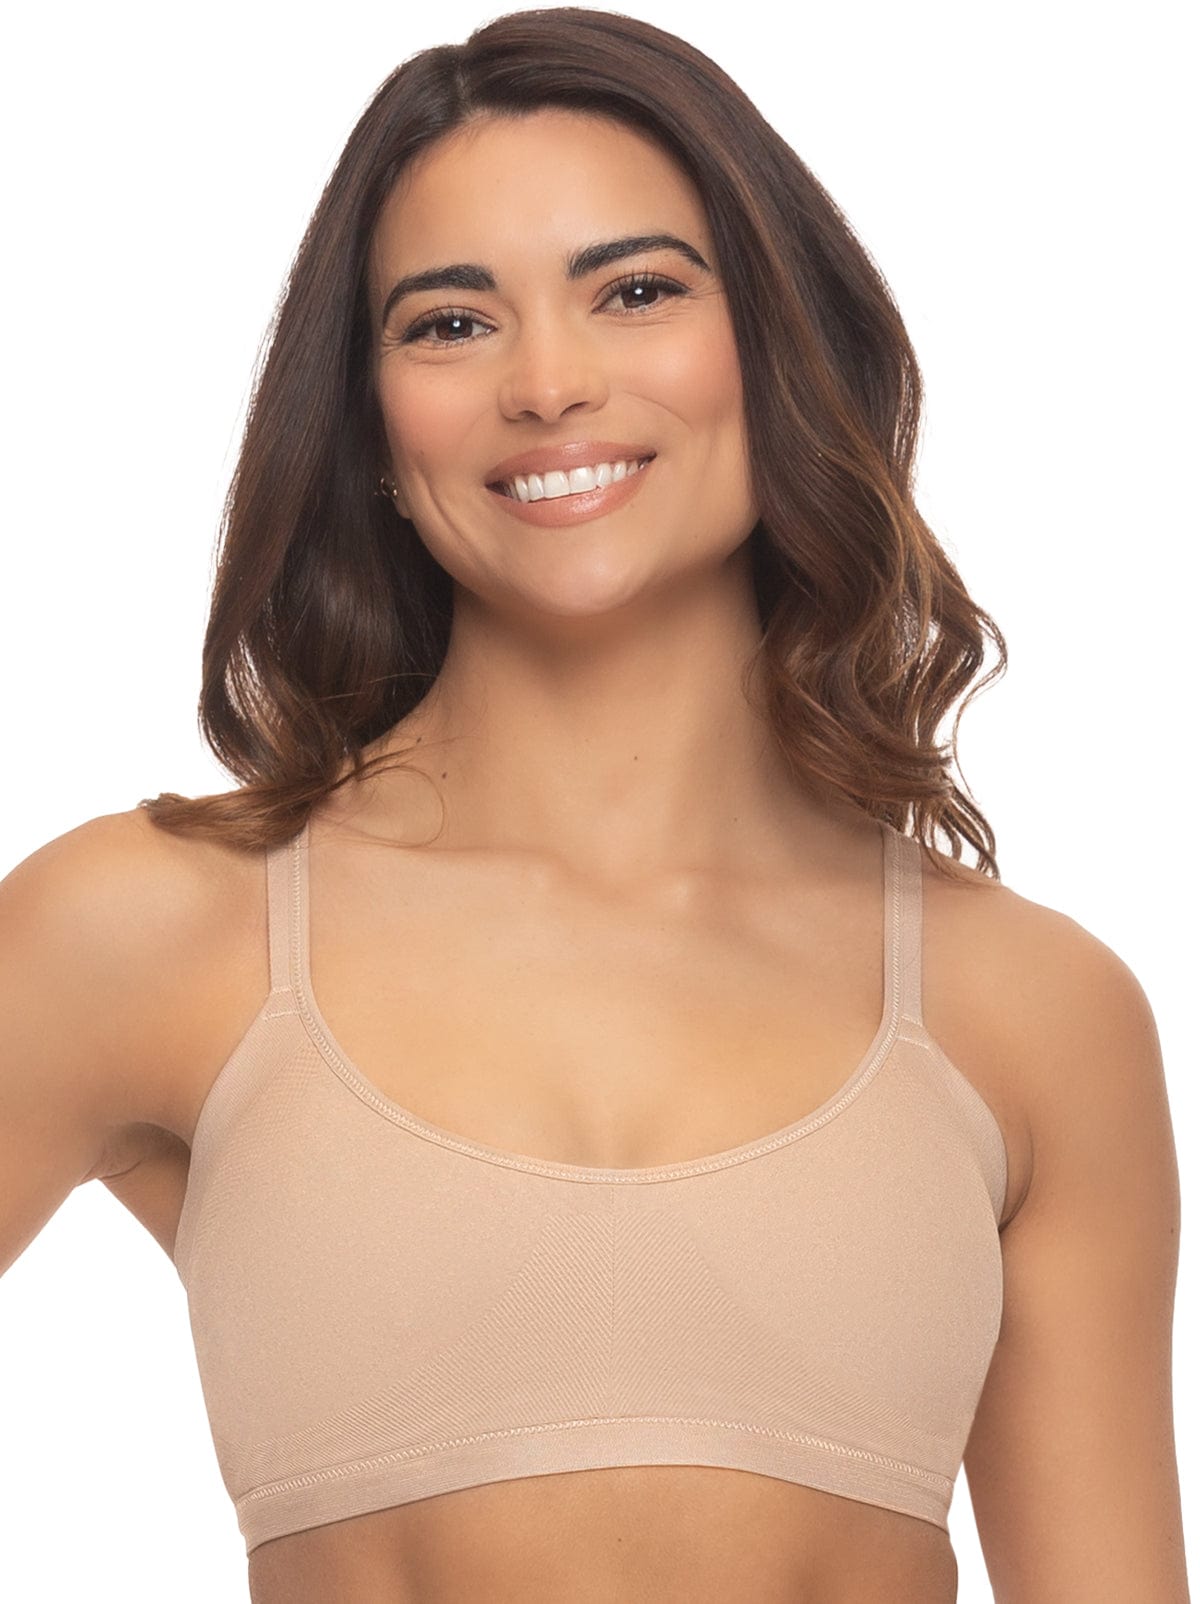 Shoppers Swear by This 'Back-Smoothing' Wireless Bra